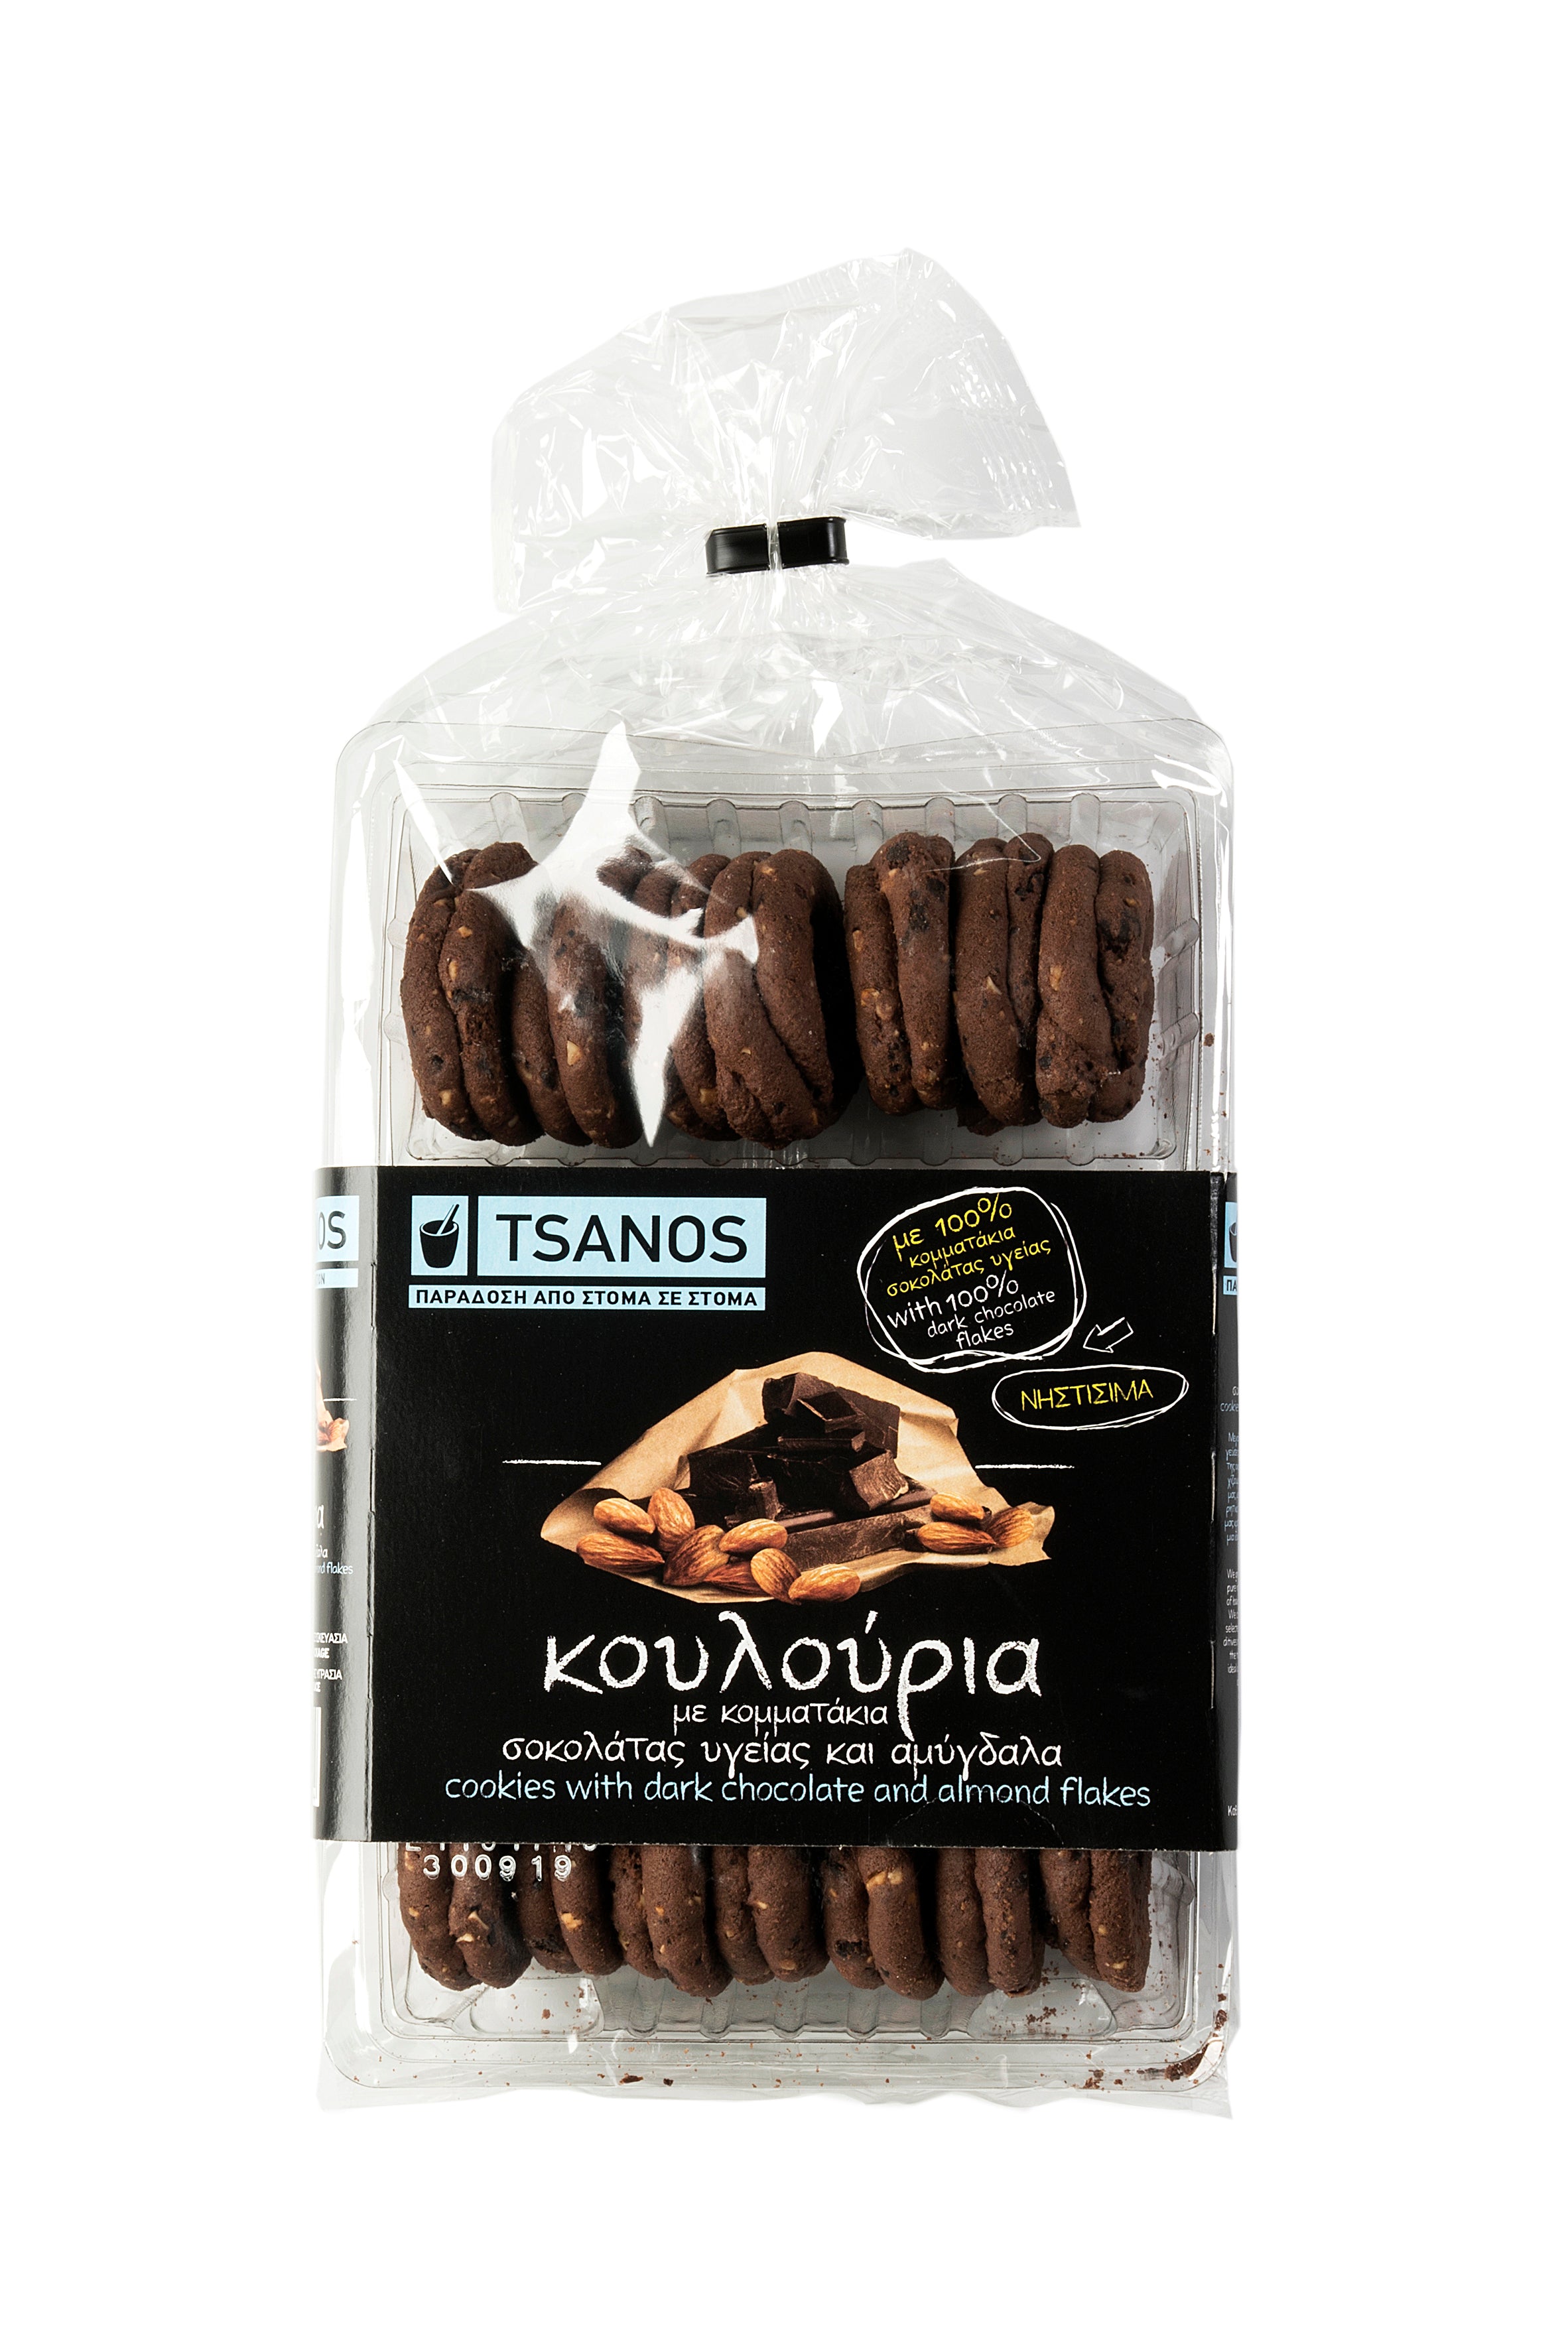 Tsanos Cookies with Dark Chocolate and Almond Flakes